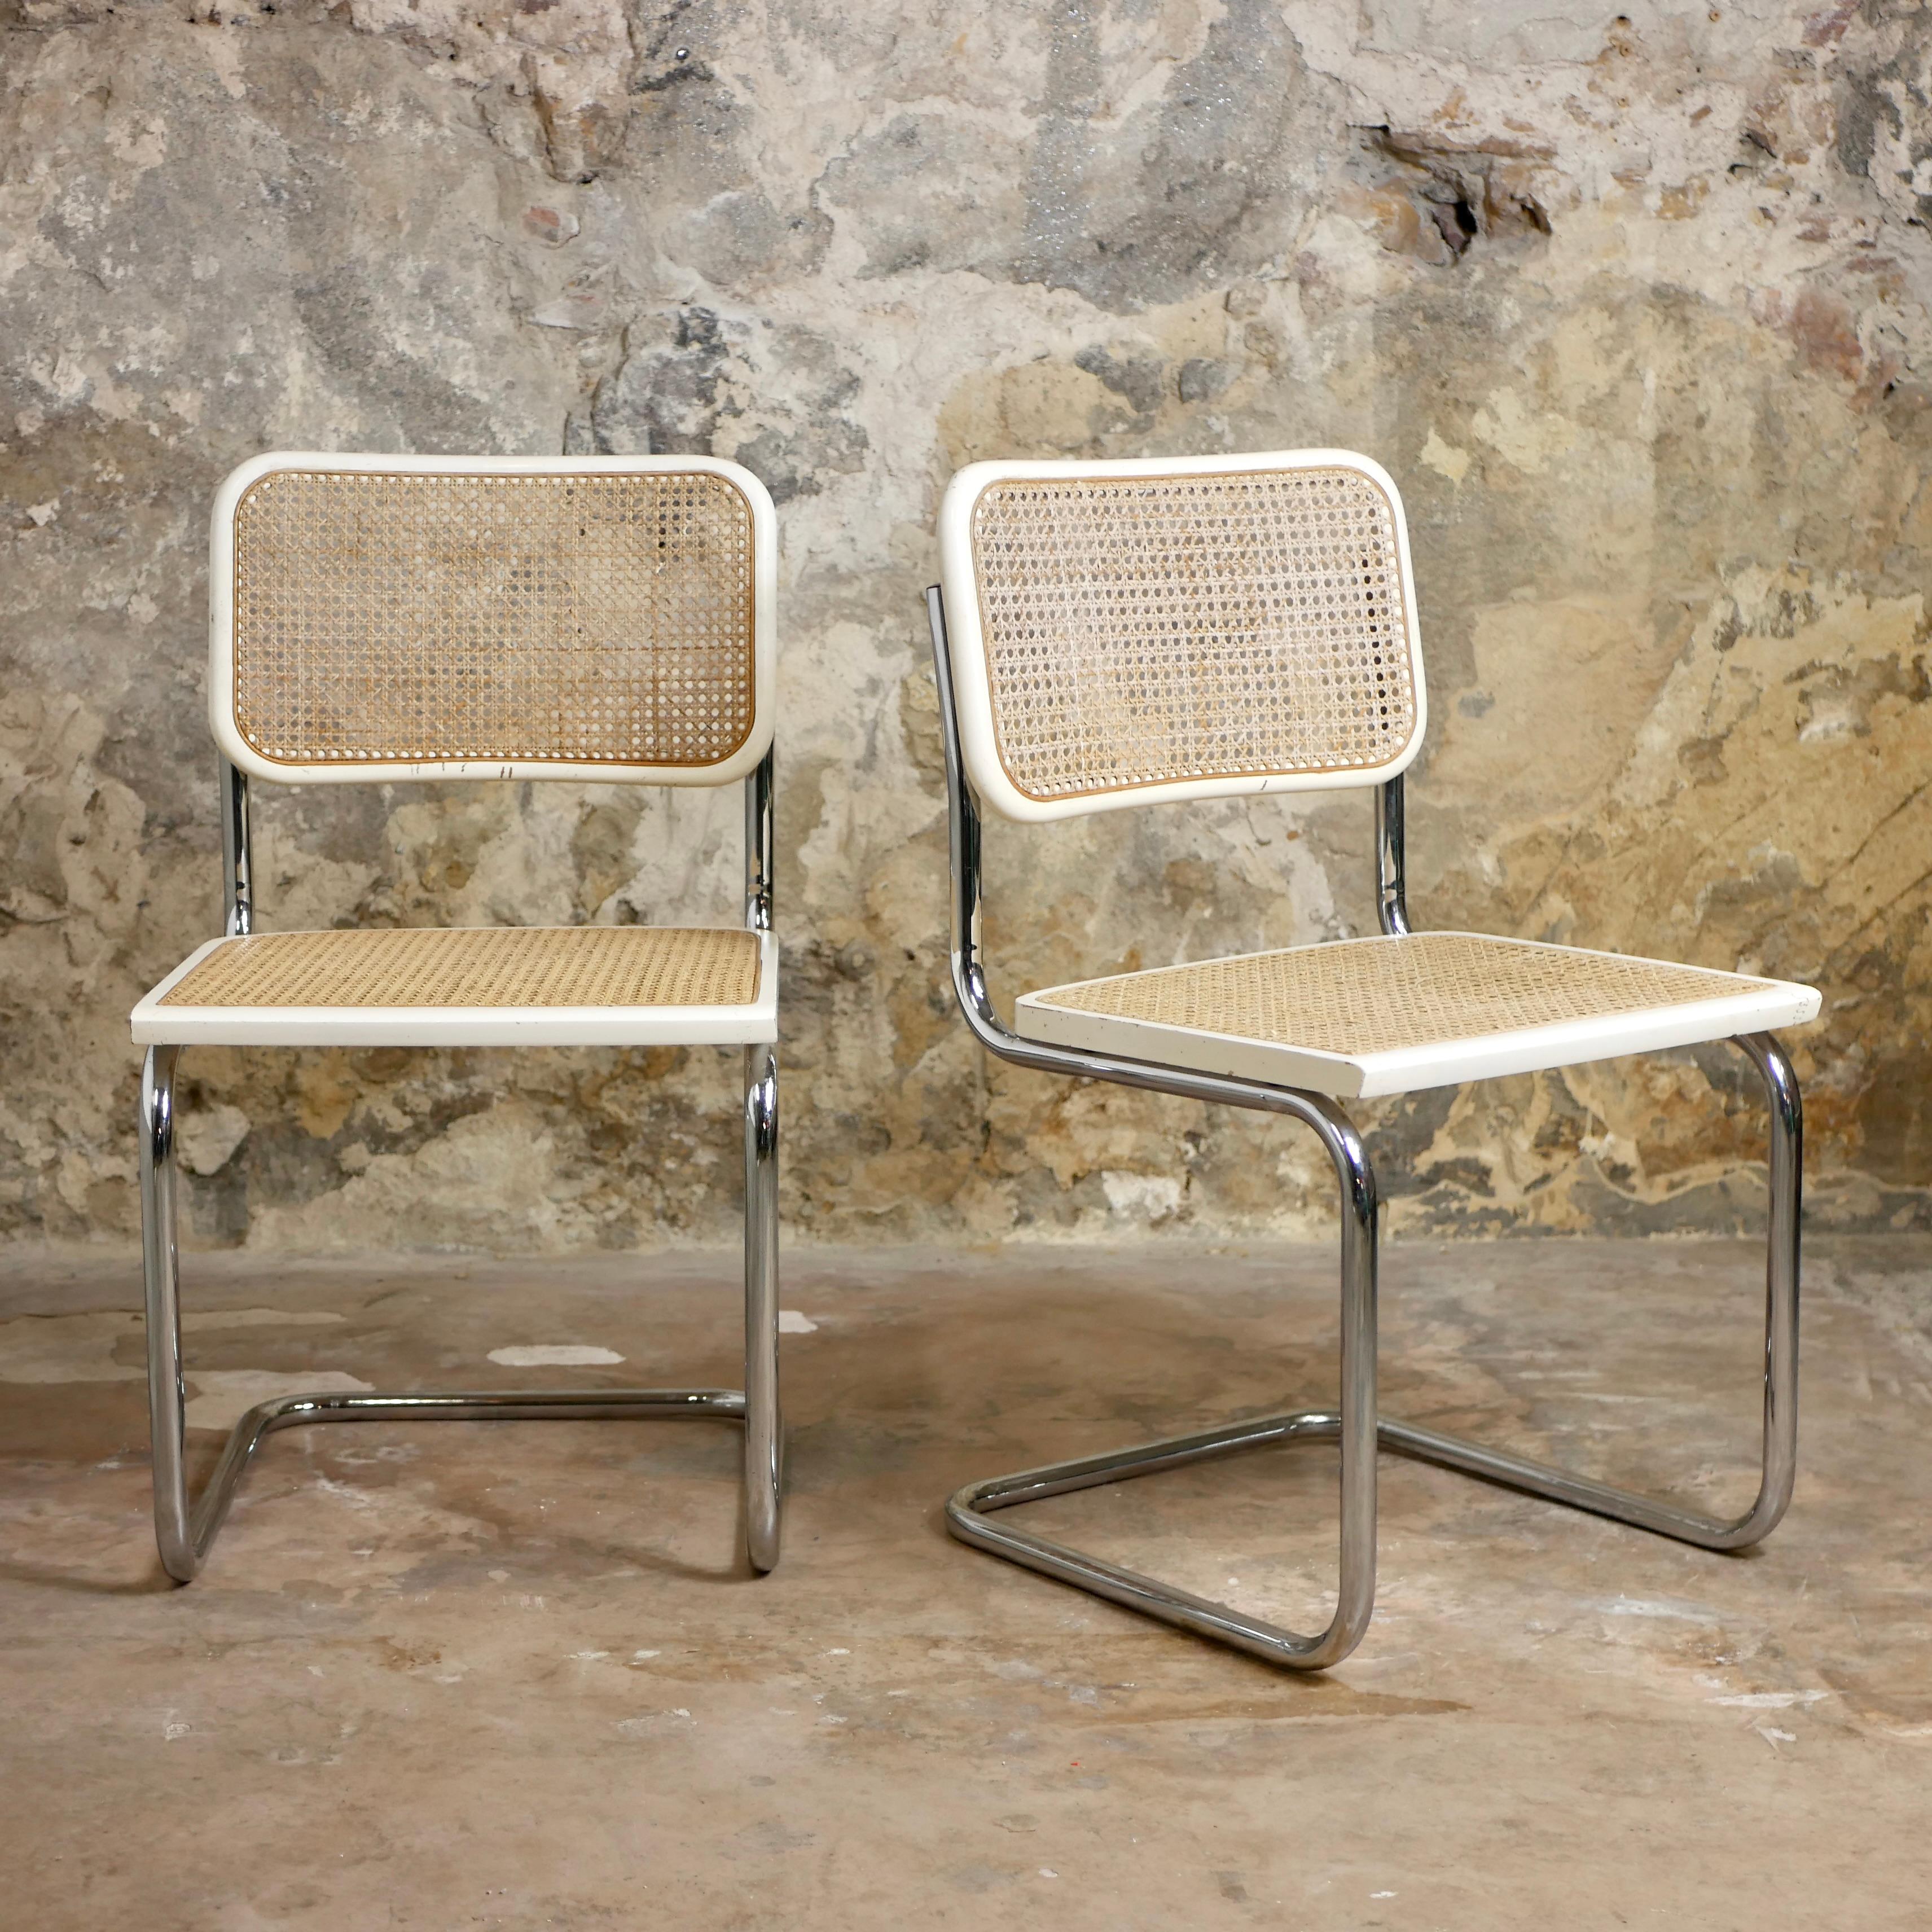 Beautiful pair of white Cesca chairs, made in Italy in the 1970s, from a design by Marcel Breuer (1928).
Cane and white lacquered beech.
Good condition overall, some light traces of time.
Stamped 